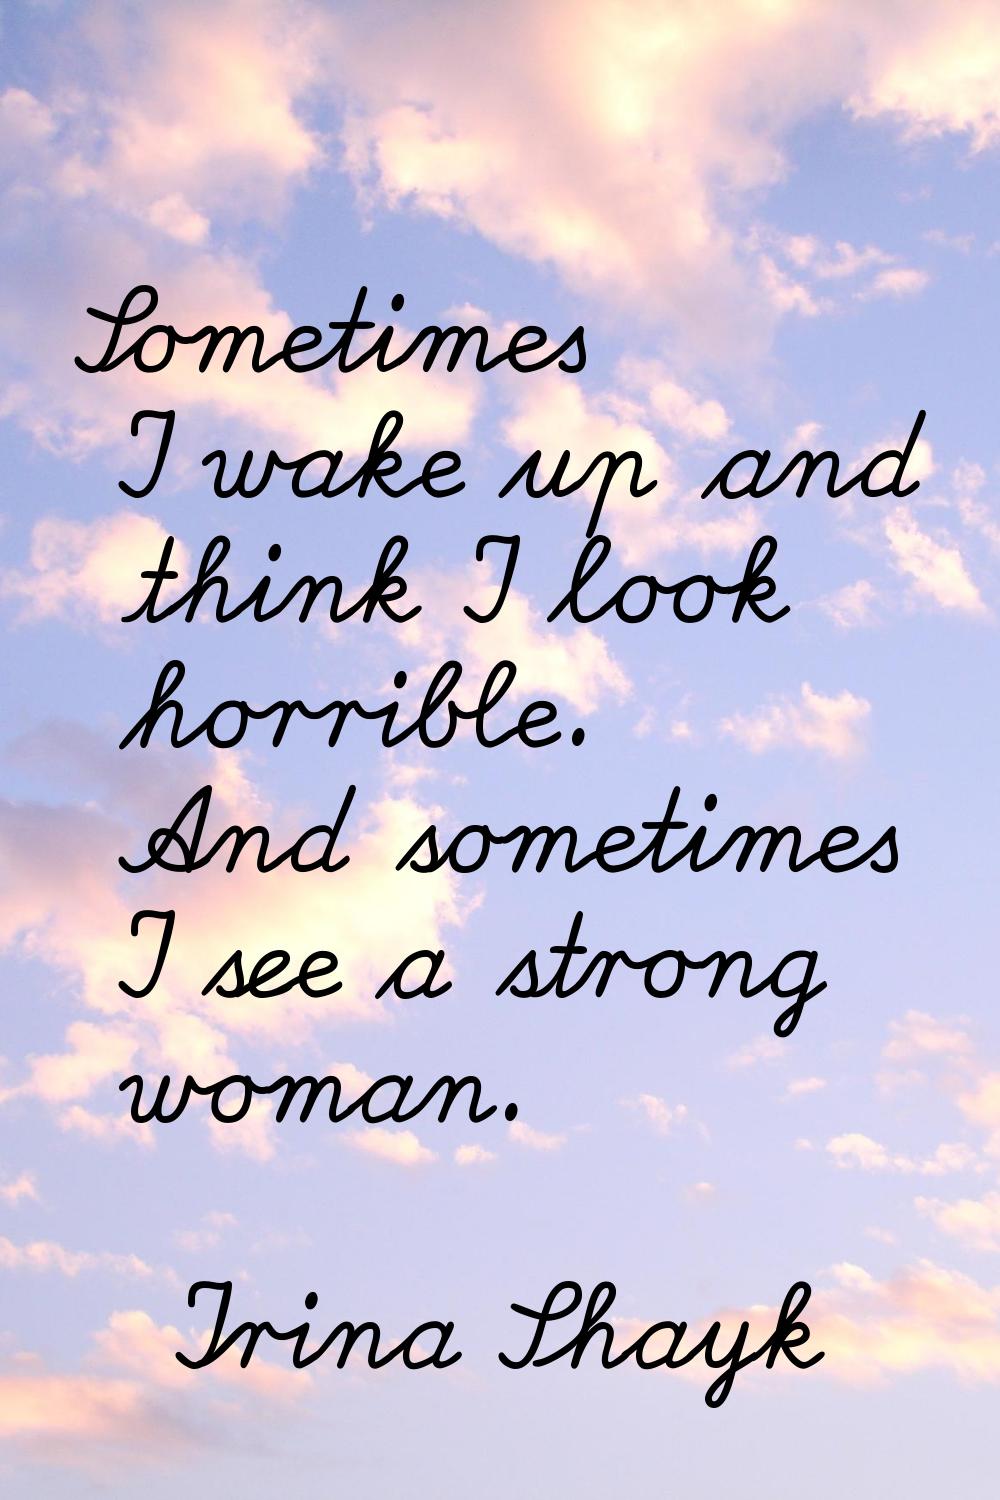 Sometimes I wake up and think I look horrible. And sometimes I see a strong woman.